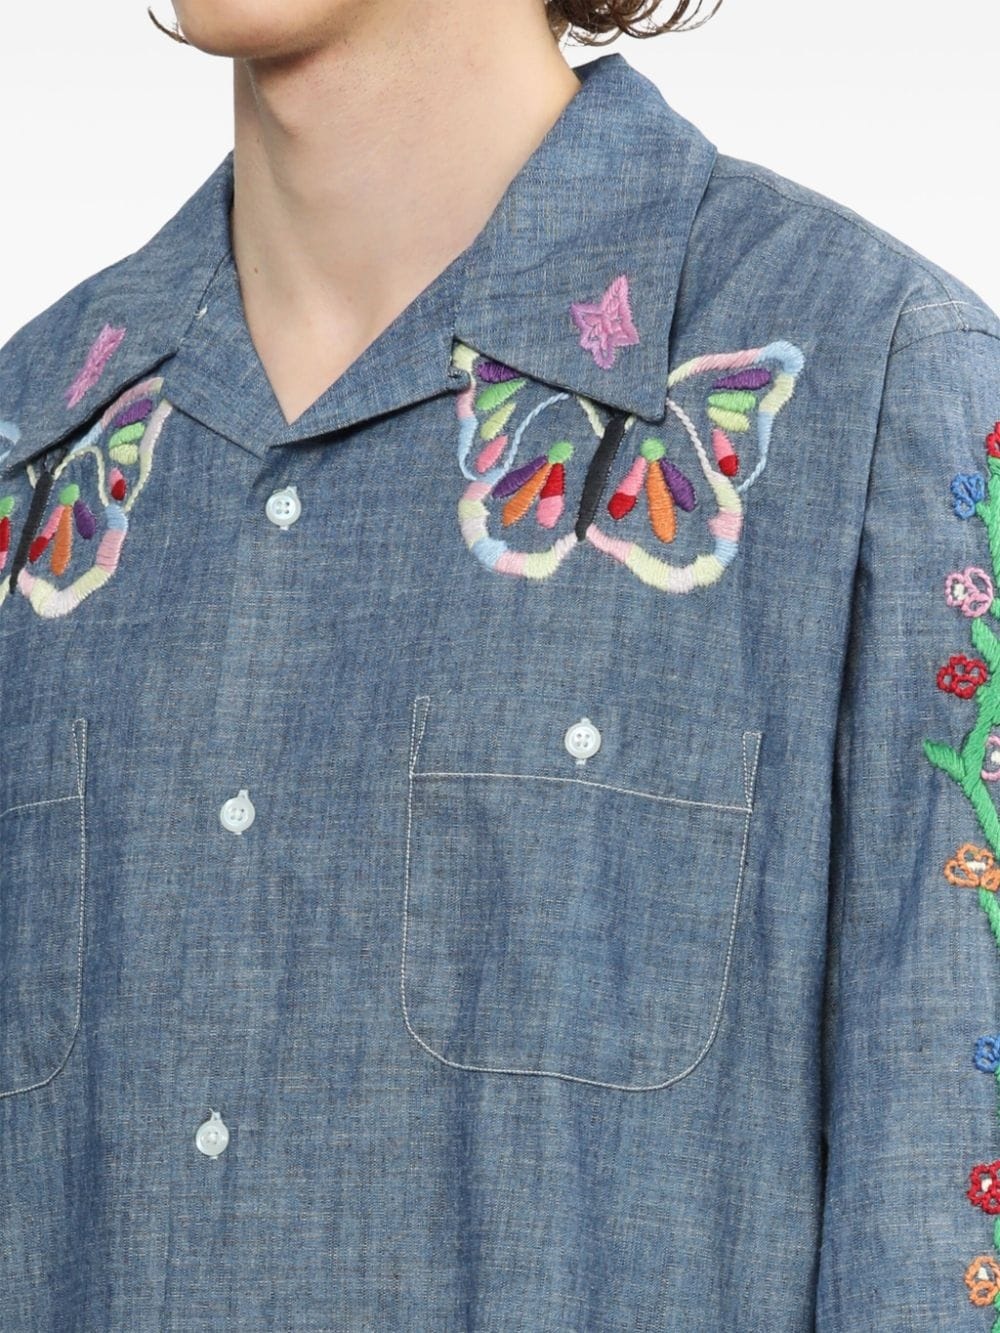 embroidered western shirt - 5